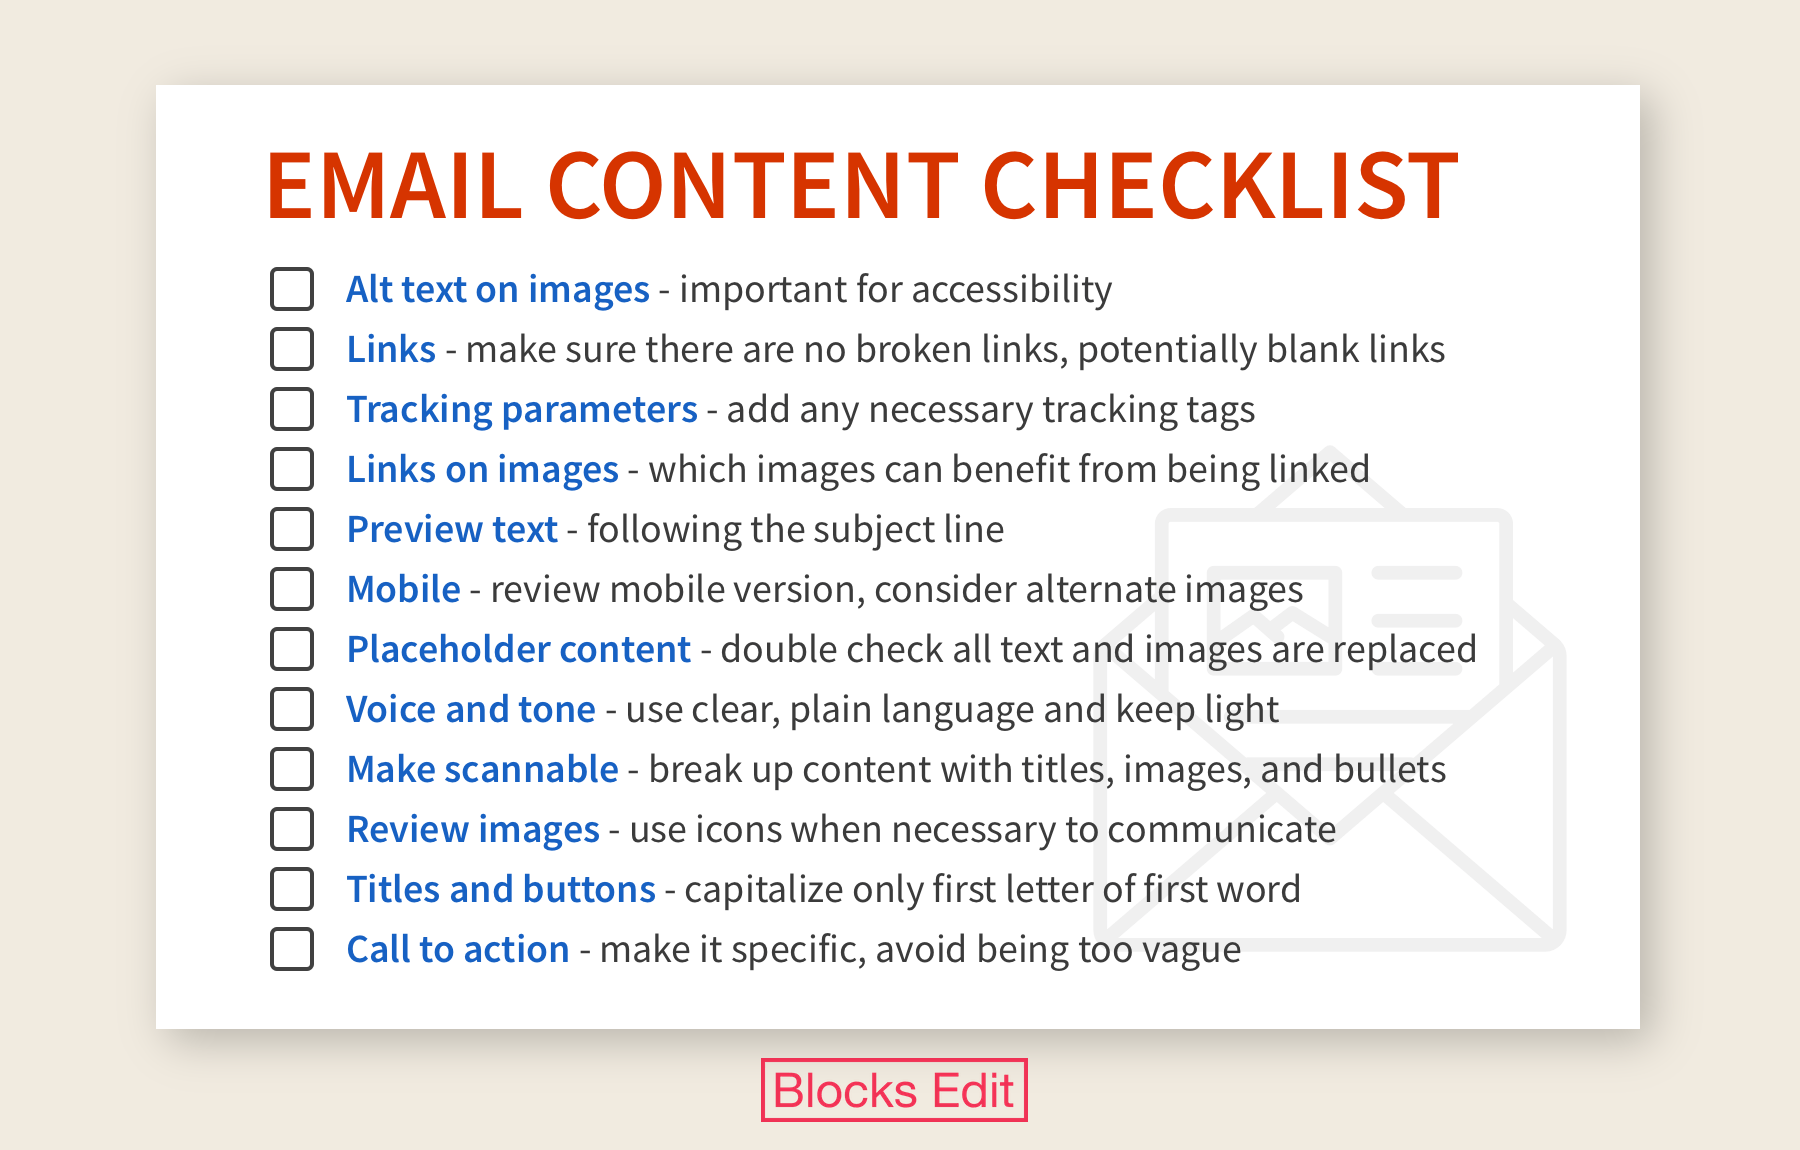 Why you should have an email content checklist